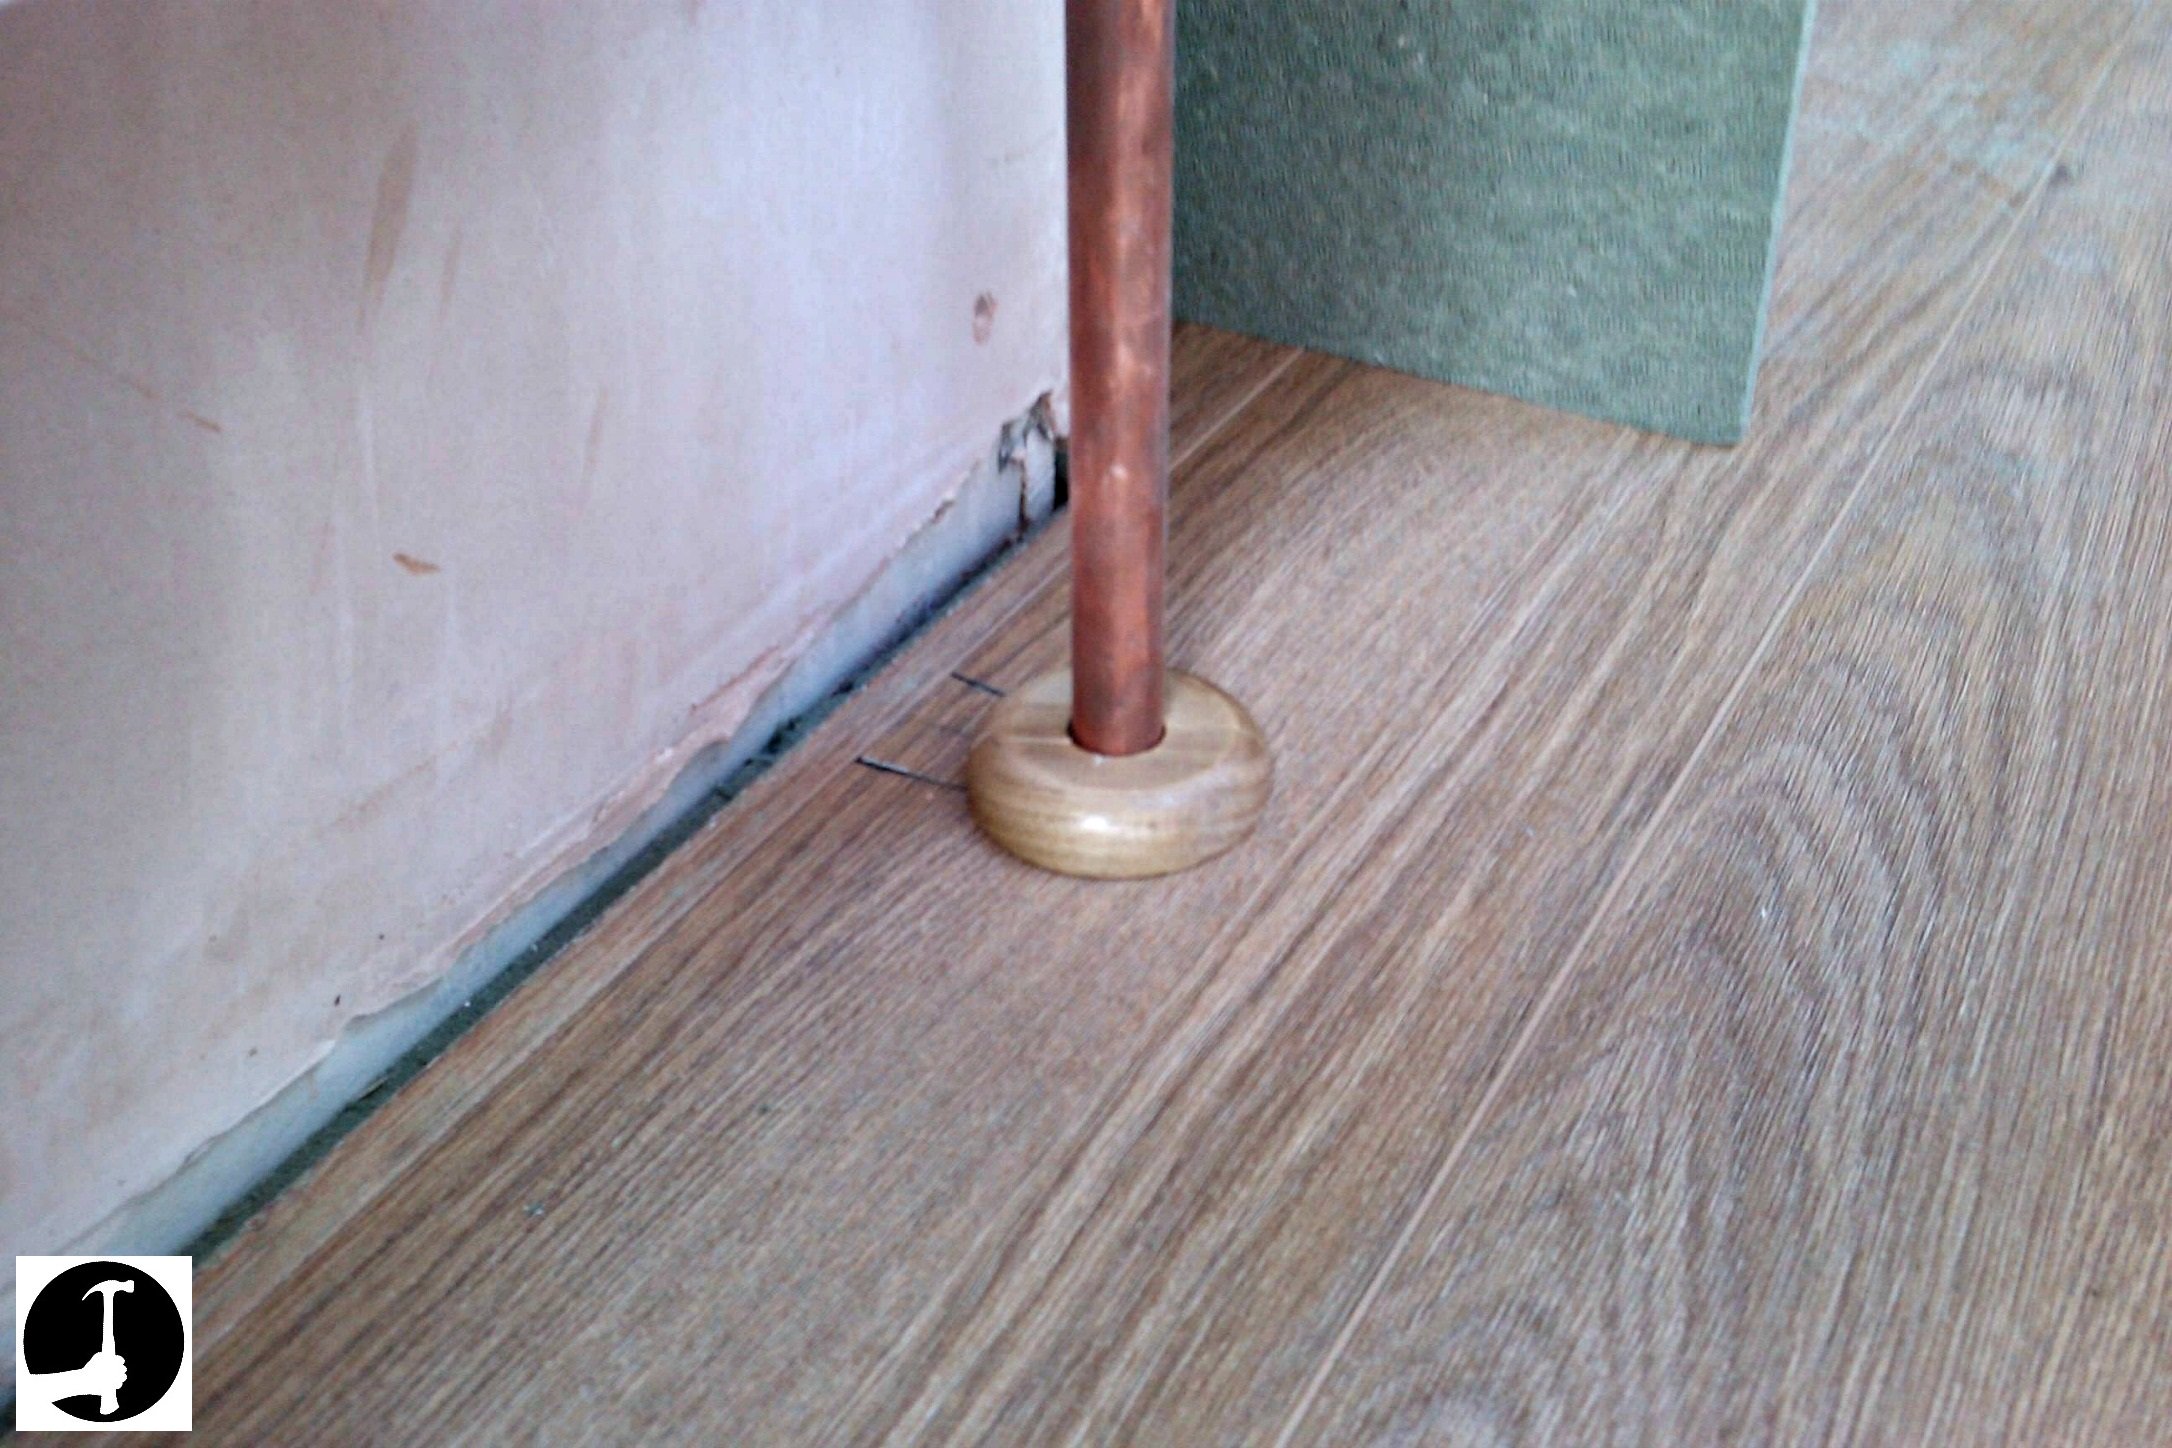 See How I Install Laminate Flooring To, How To Cut Vinyl Planks Around Pipes